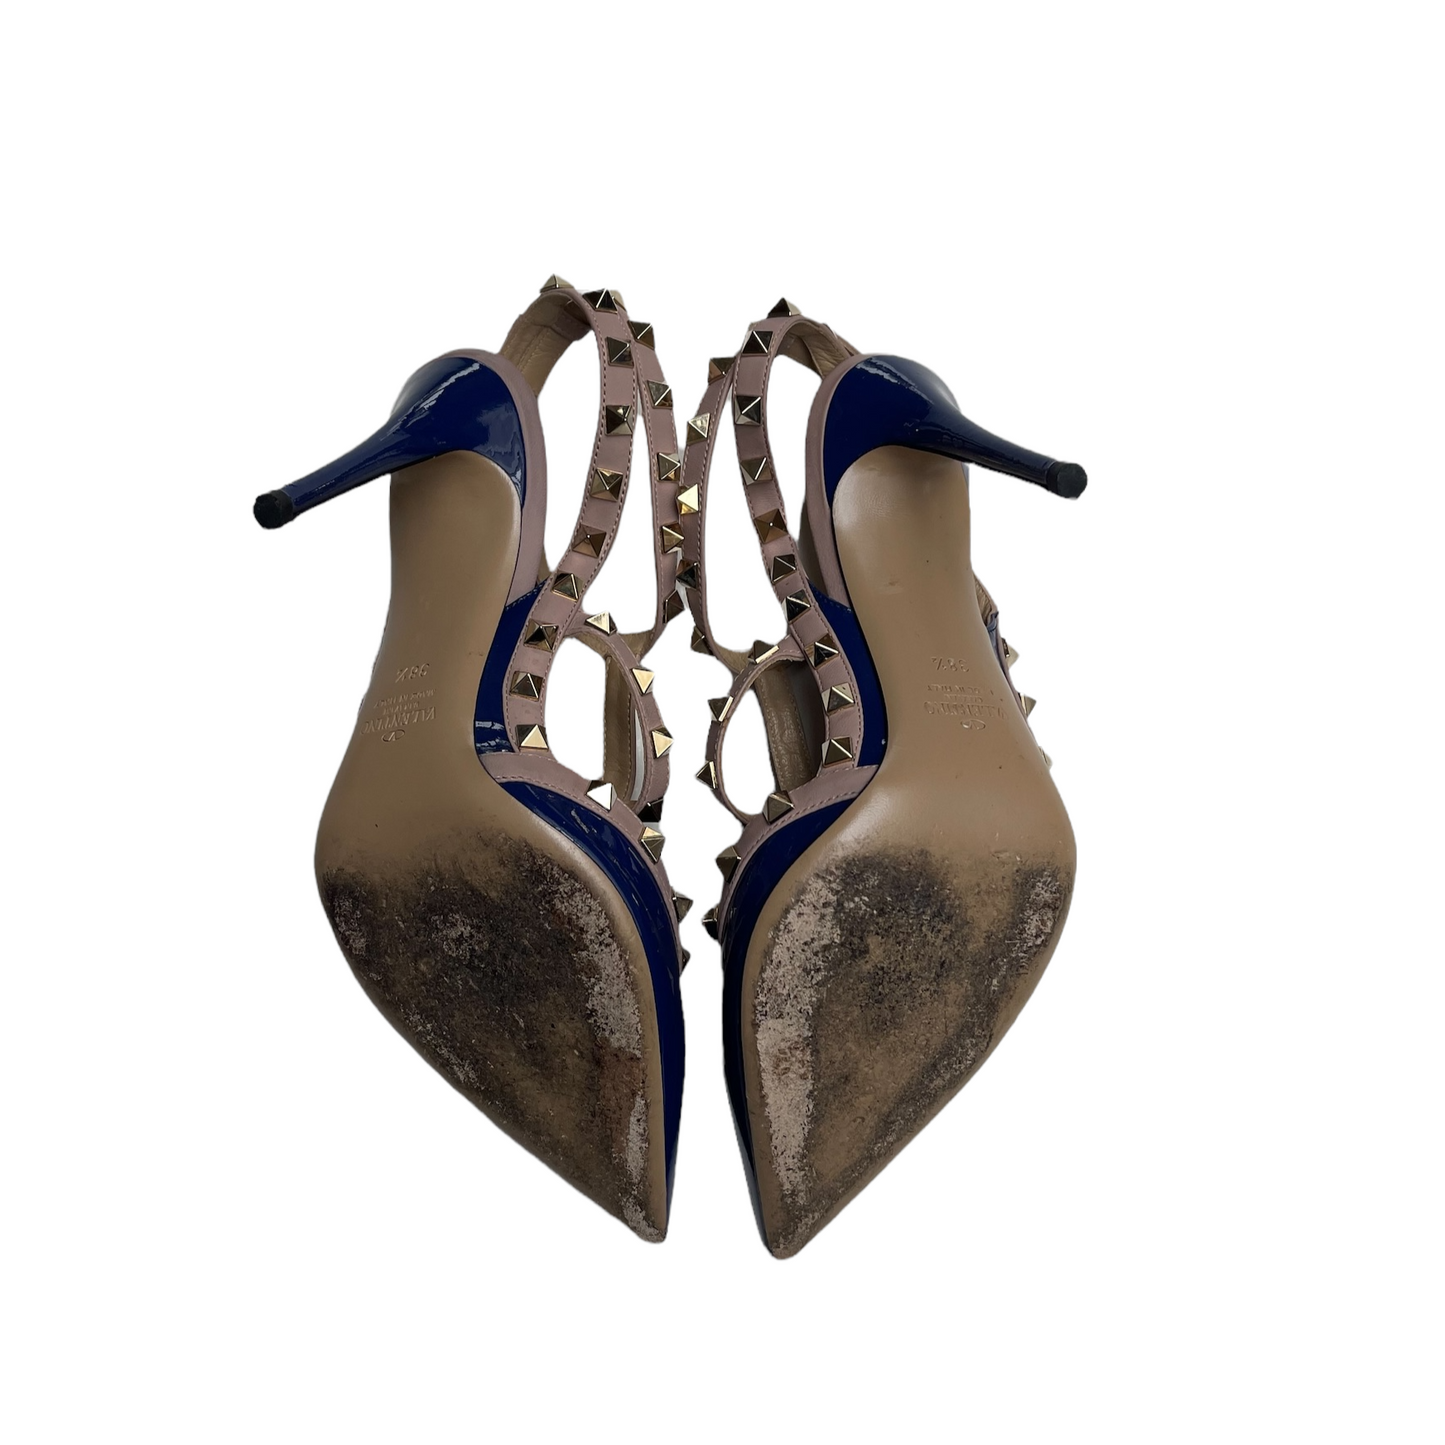 Blue Patent Leather Heels - 8.5